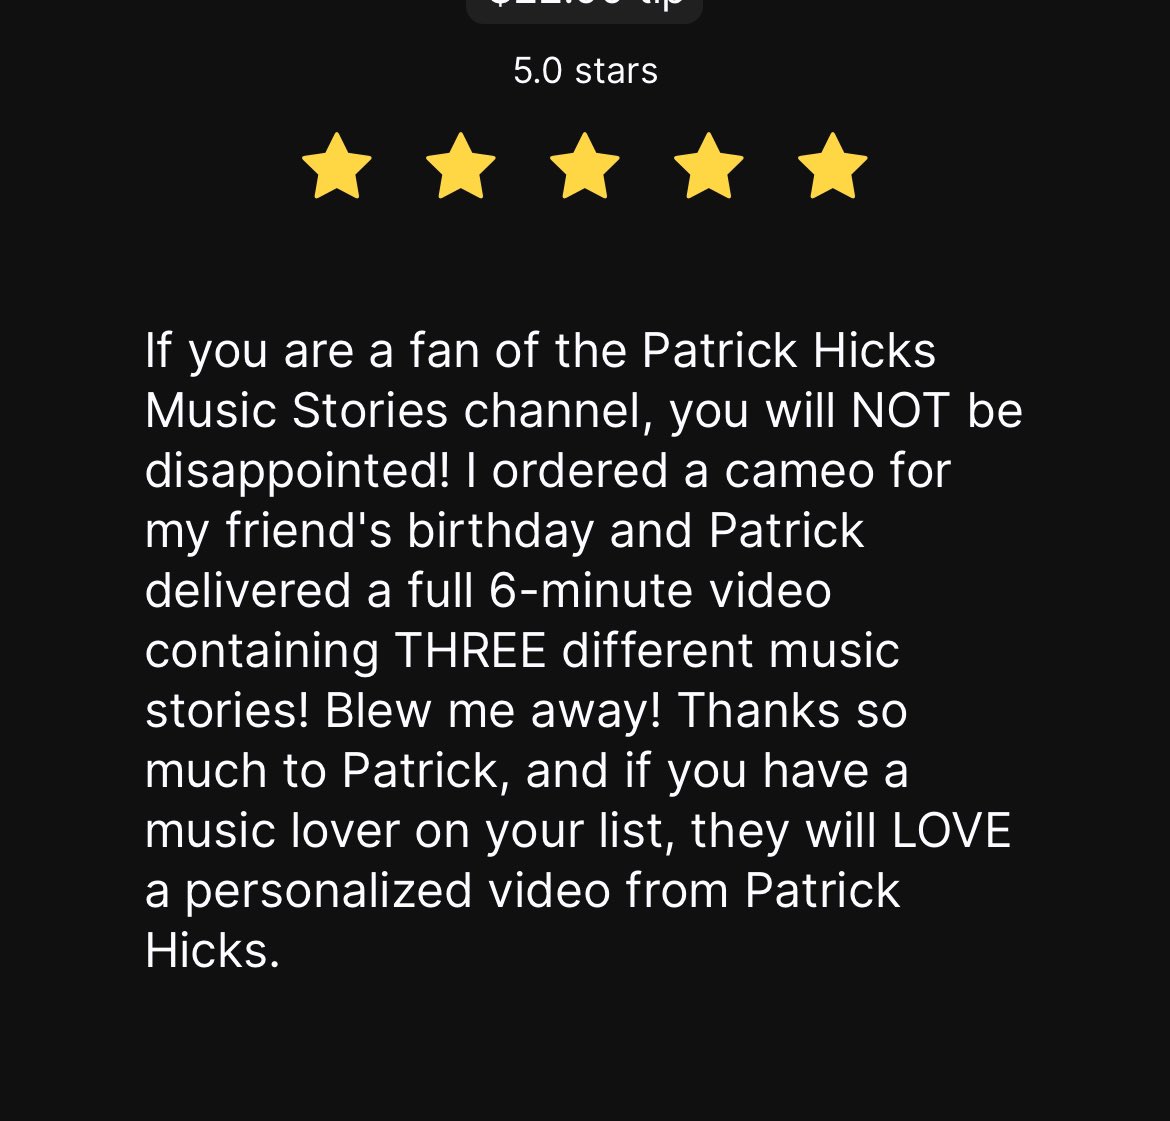 First Cameo review! Order yours today 😀#music #musicstory #musichistory #cameo #patrickhicksmusicstories